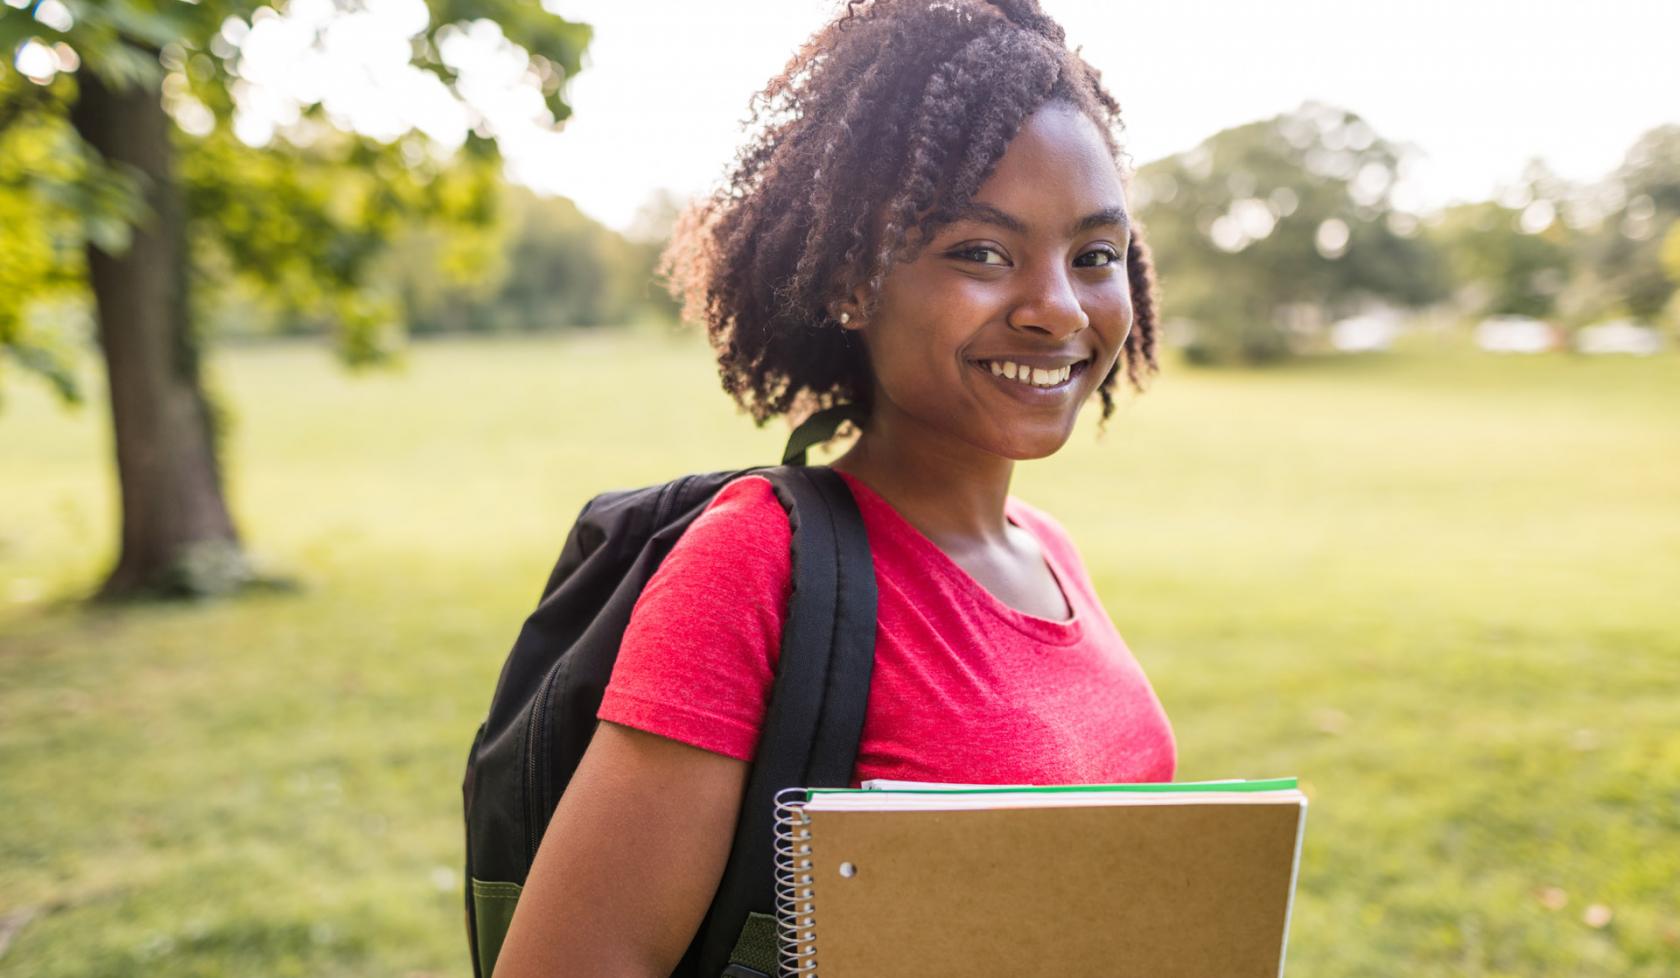 Smiling Young Black Female Student Wearing Backpack and Holding Books - Outdoors